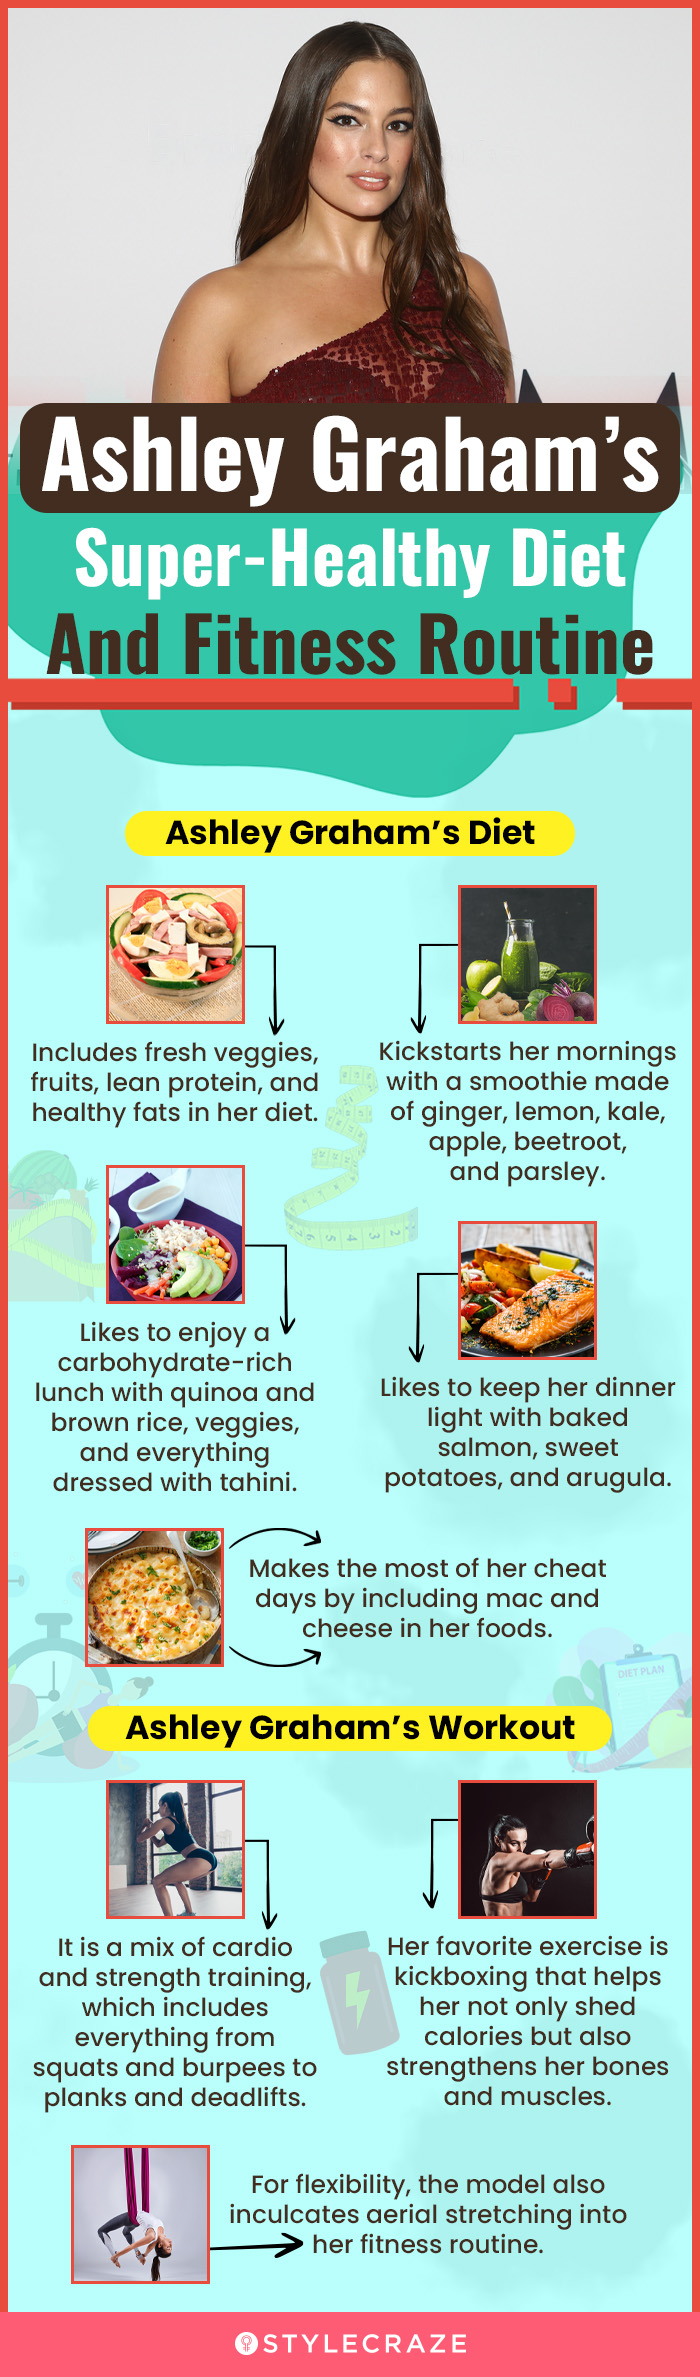 ashley graham’s super healthy diet and fitness routine (infographic)